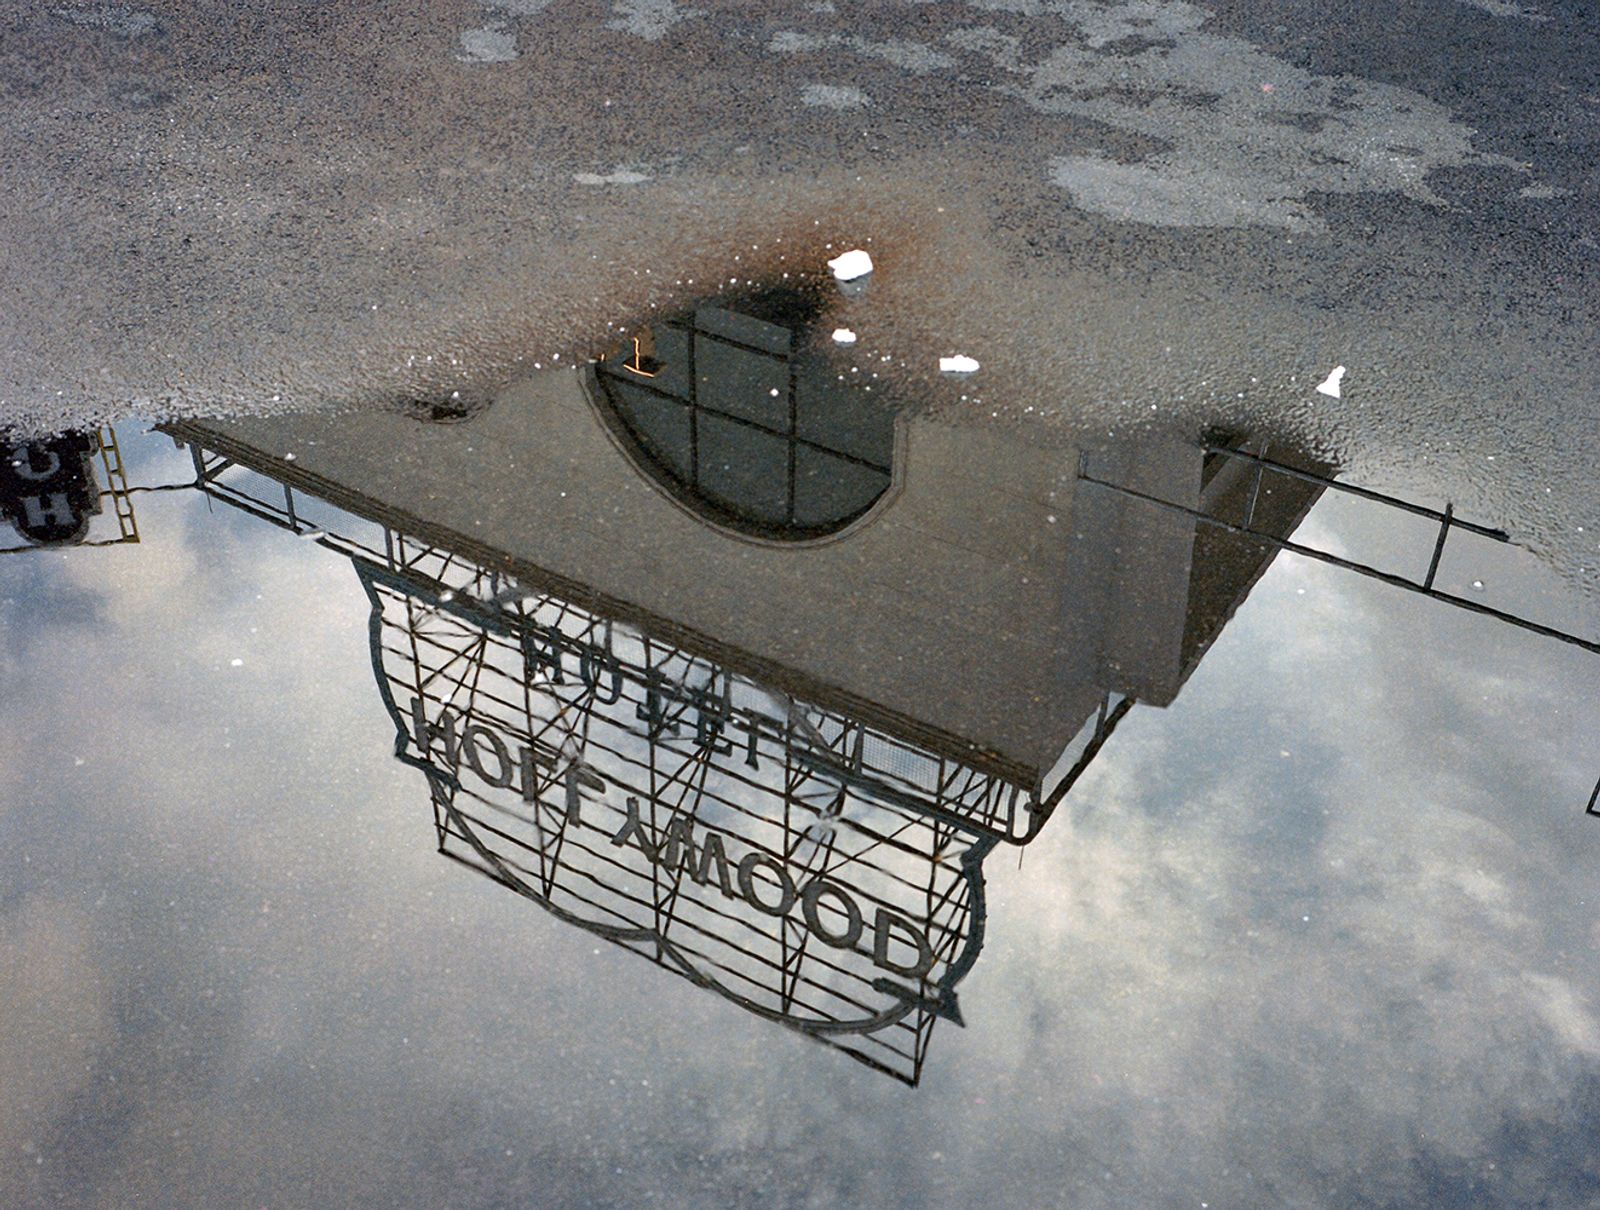 © Ge Zeng - A Hollywood advertising sign is reflected in water